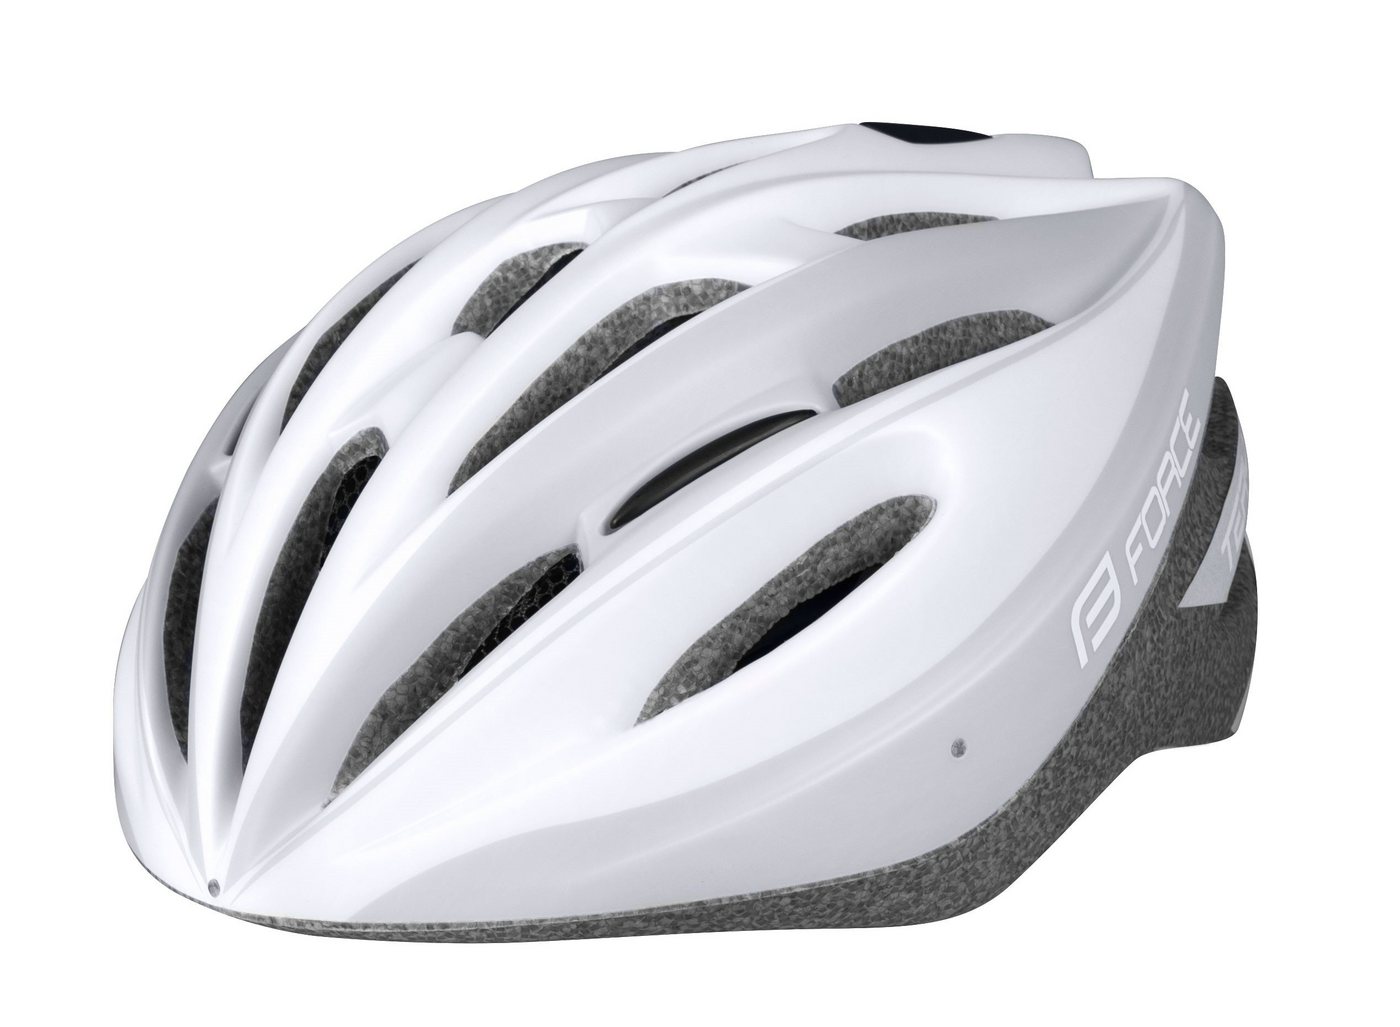 FORCE Fahrradhelm Helm FORCE TERY white-grey L - XL von FORCE